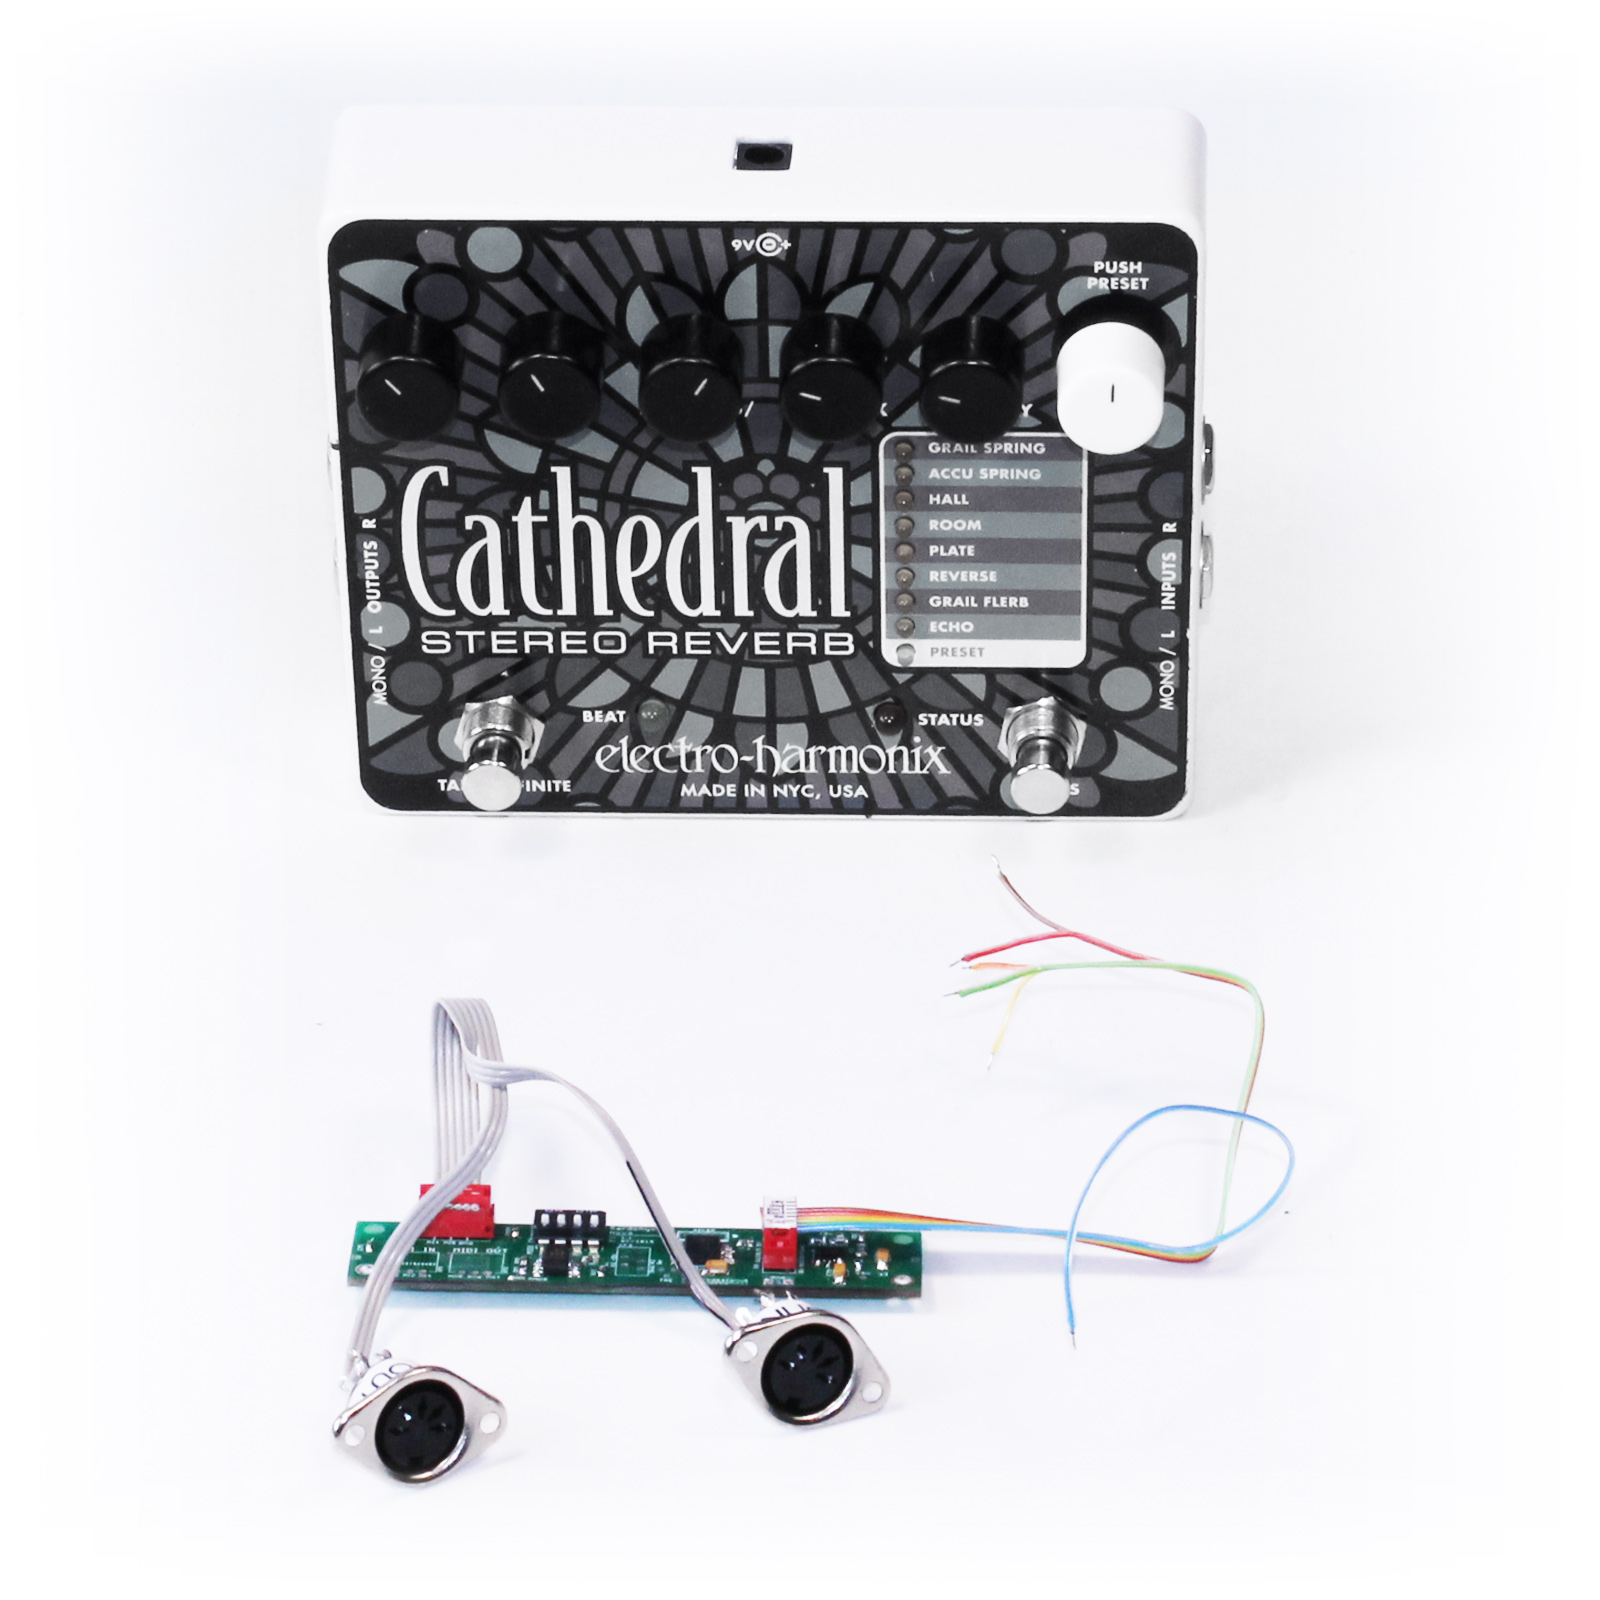 MIDI control module for EHX Cathedral Stereo Reverb